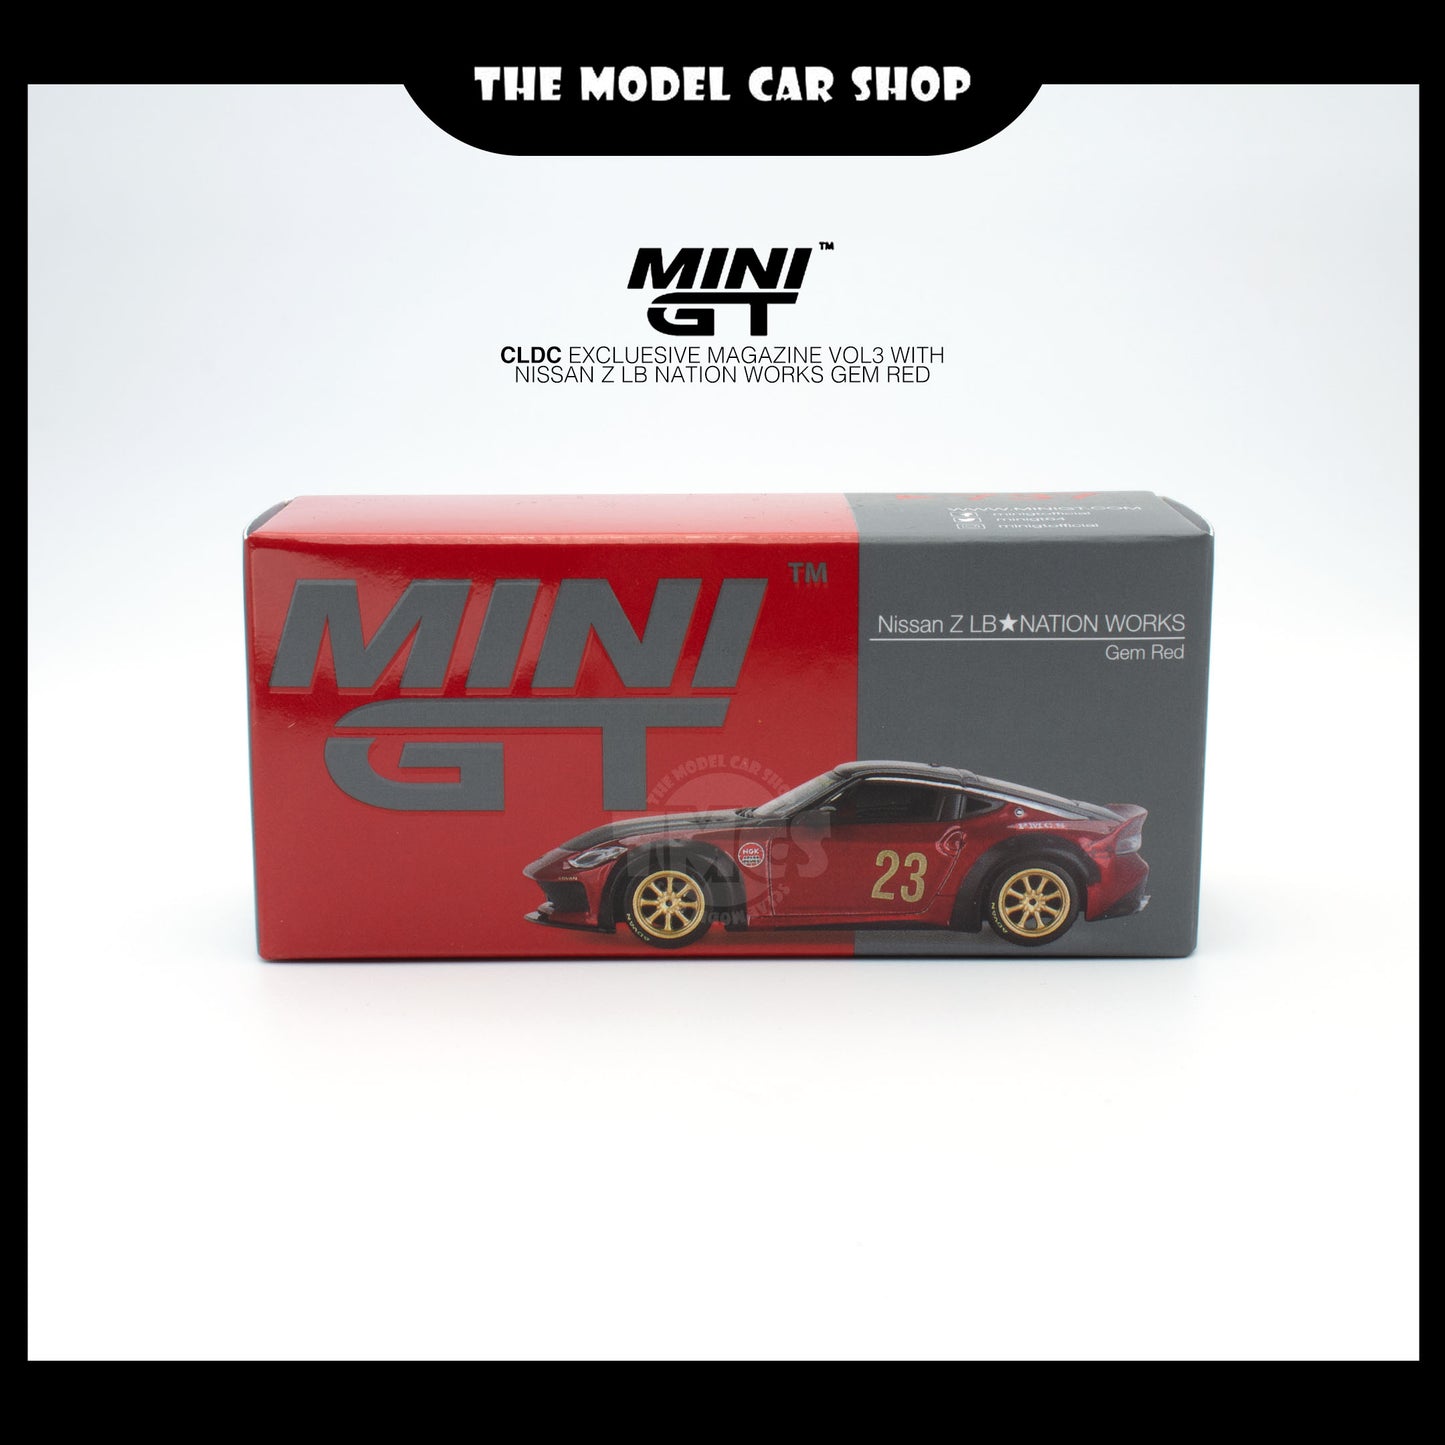 [MINI GT] CLDC Exclusive Magazine VOL3 with Nissan Z LB Nation Works Gem Red - English Version